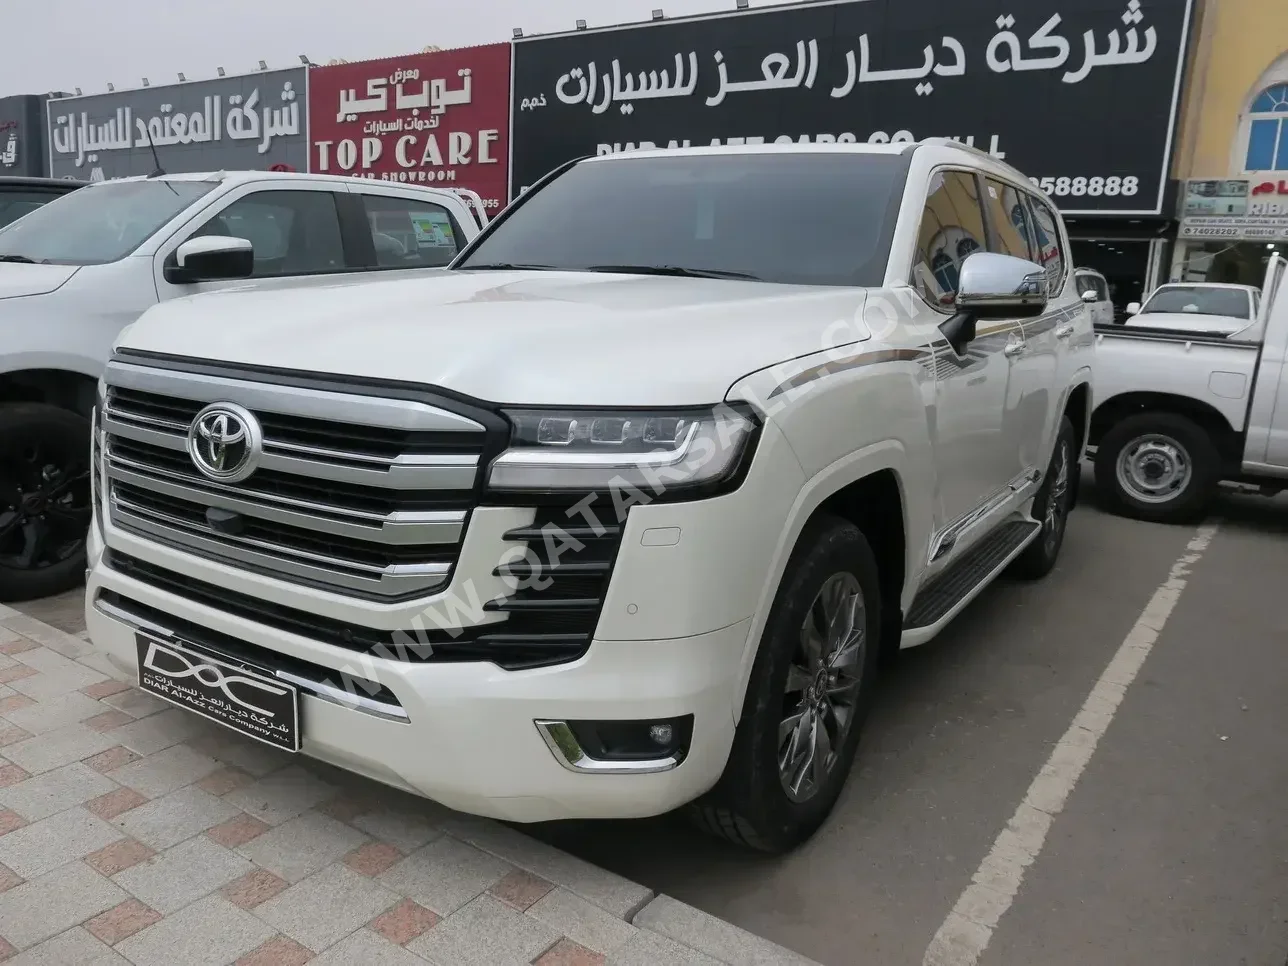 Toyota  Land Cruiser  GXR Twin Turbo  2023  Automatic  15,000 Km  6 Cylinder  Four Wheel Drive (4WD)  SUV  White  With Warranty